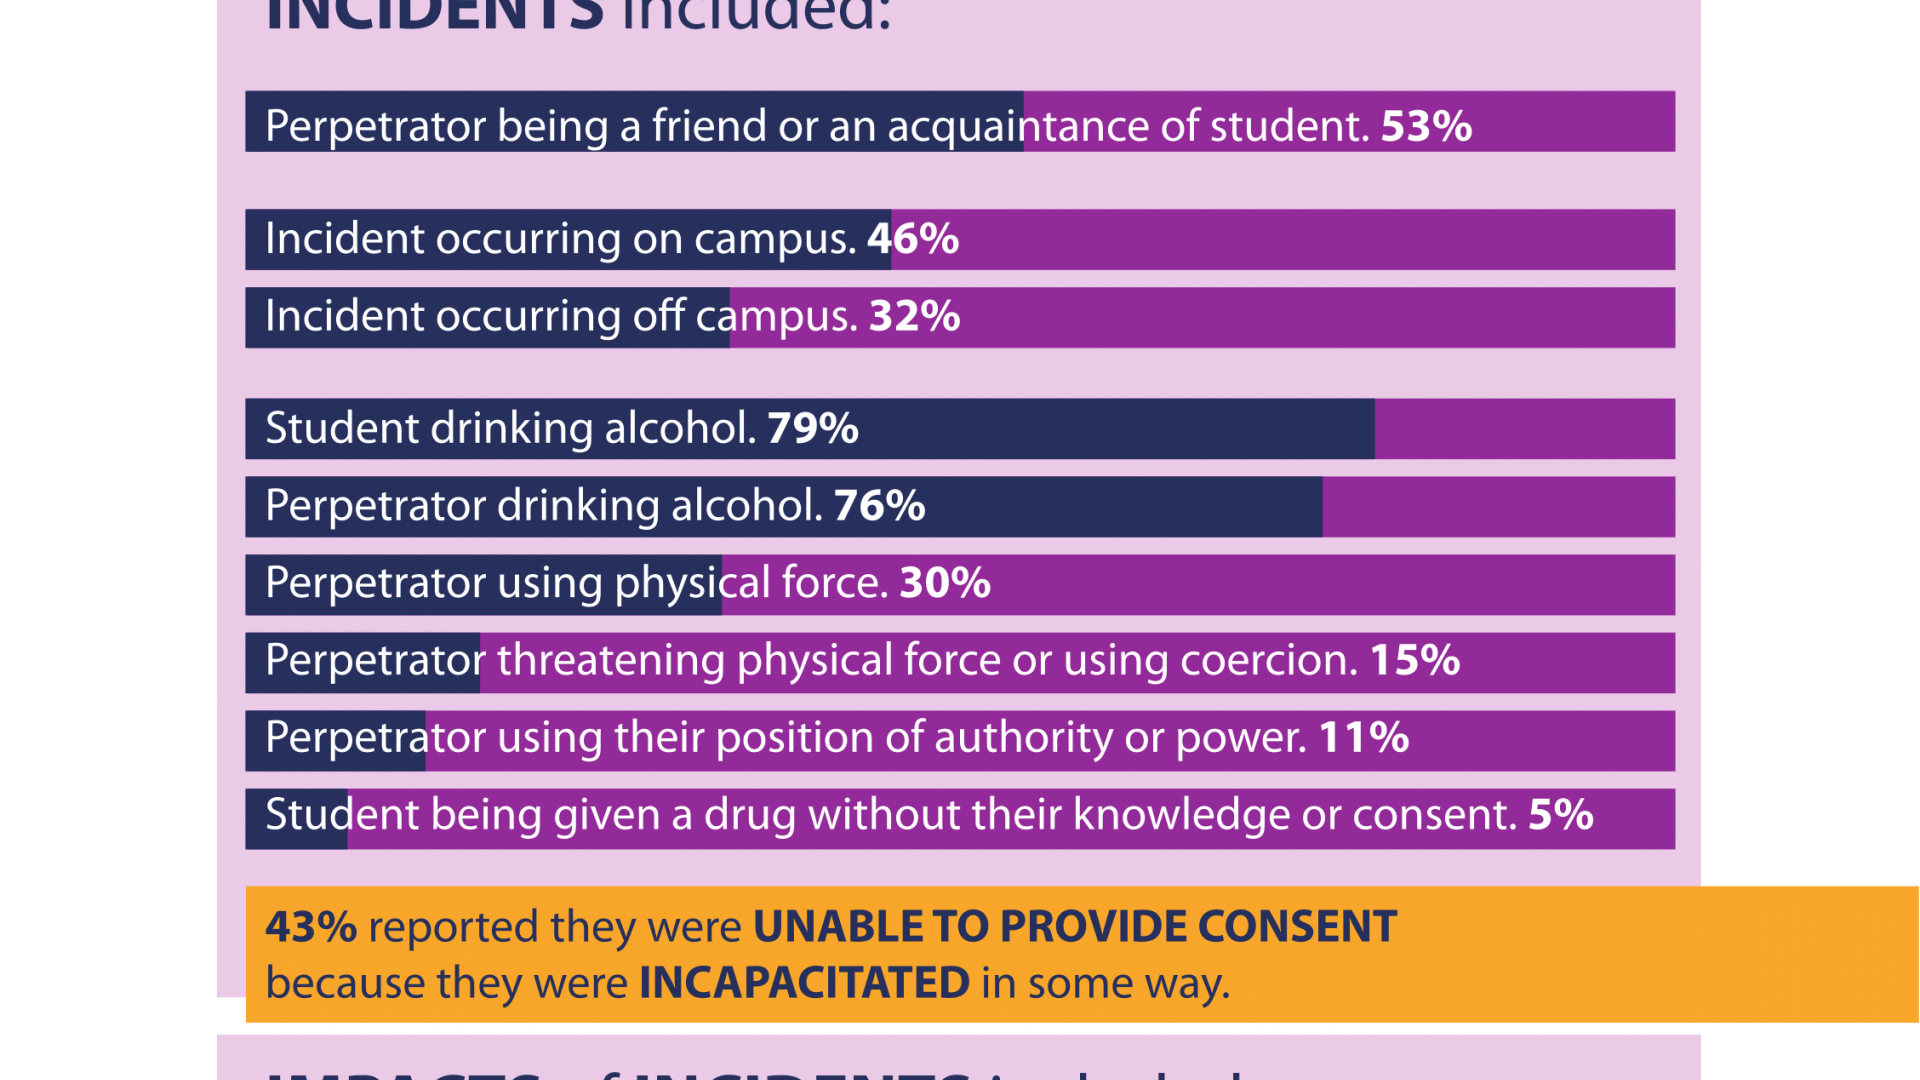 Incidents and Impacts of sexual assault infographic